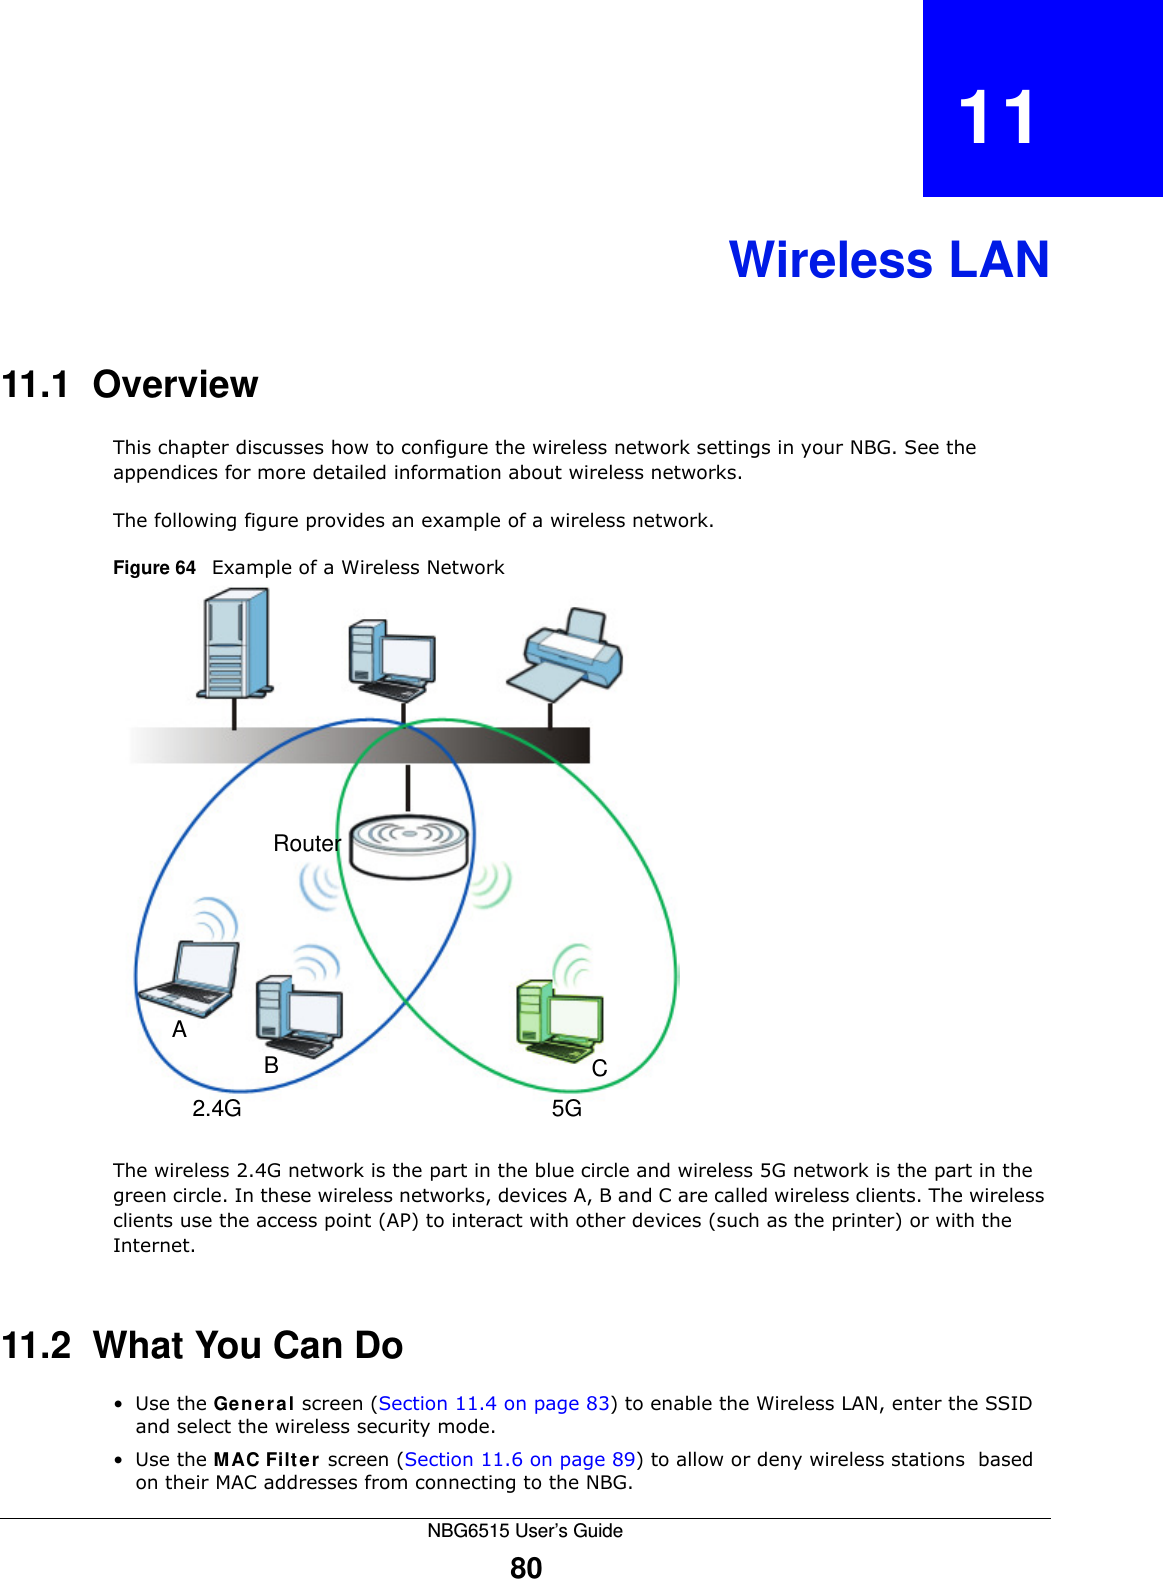 NBG6515 User’s Guide80CHAPTER   11Wireless LAN11.1  OverviewThis chapter discusses how to configure the wireless network settings in your NBG. See the appendices for more detailed information about wireless networks.The following figure provides an example of a wireless network.Figure 64   Example of a Wireless NetworkThe wireless 2.4G network is the part in the blue circle and wireless 5G network is the part in the green circle. In these wireless networks, devices A, B and C are called wireless clients. The wireless clients use the access point (AP) to interact with other devices (such as the printer) or with the Internet.11.2  What You Can Do•Use the General screen (Section 11.4 on page 83) to enable the Wireless LAN, enter the SSID and select the wireless security mode.•Use the MAC Filter screen (Section 11.6 on page 89) to allow or deny wireless stations  based on their MAC addresses from connecting to the NBG.ABRouter2.4G 5GC